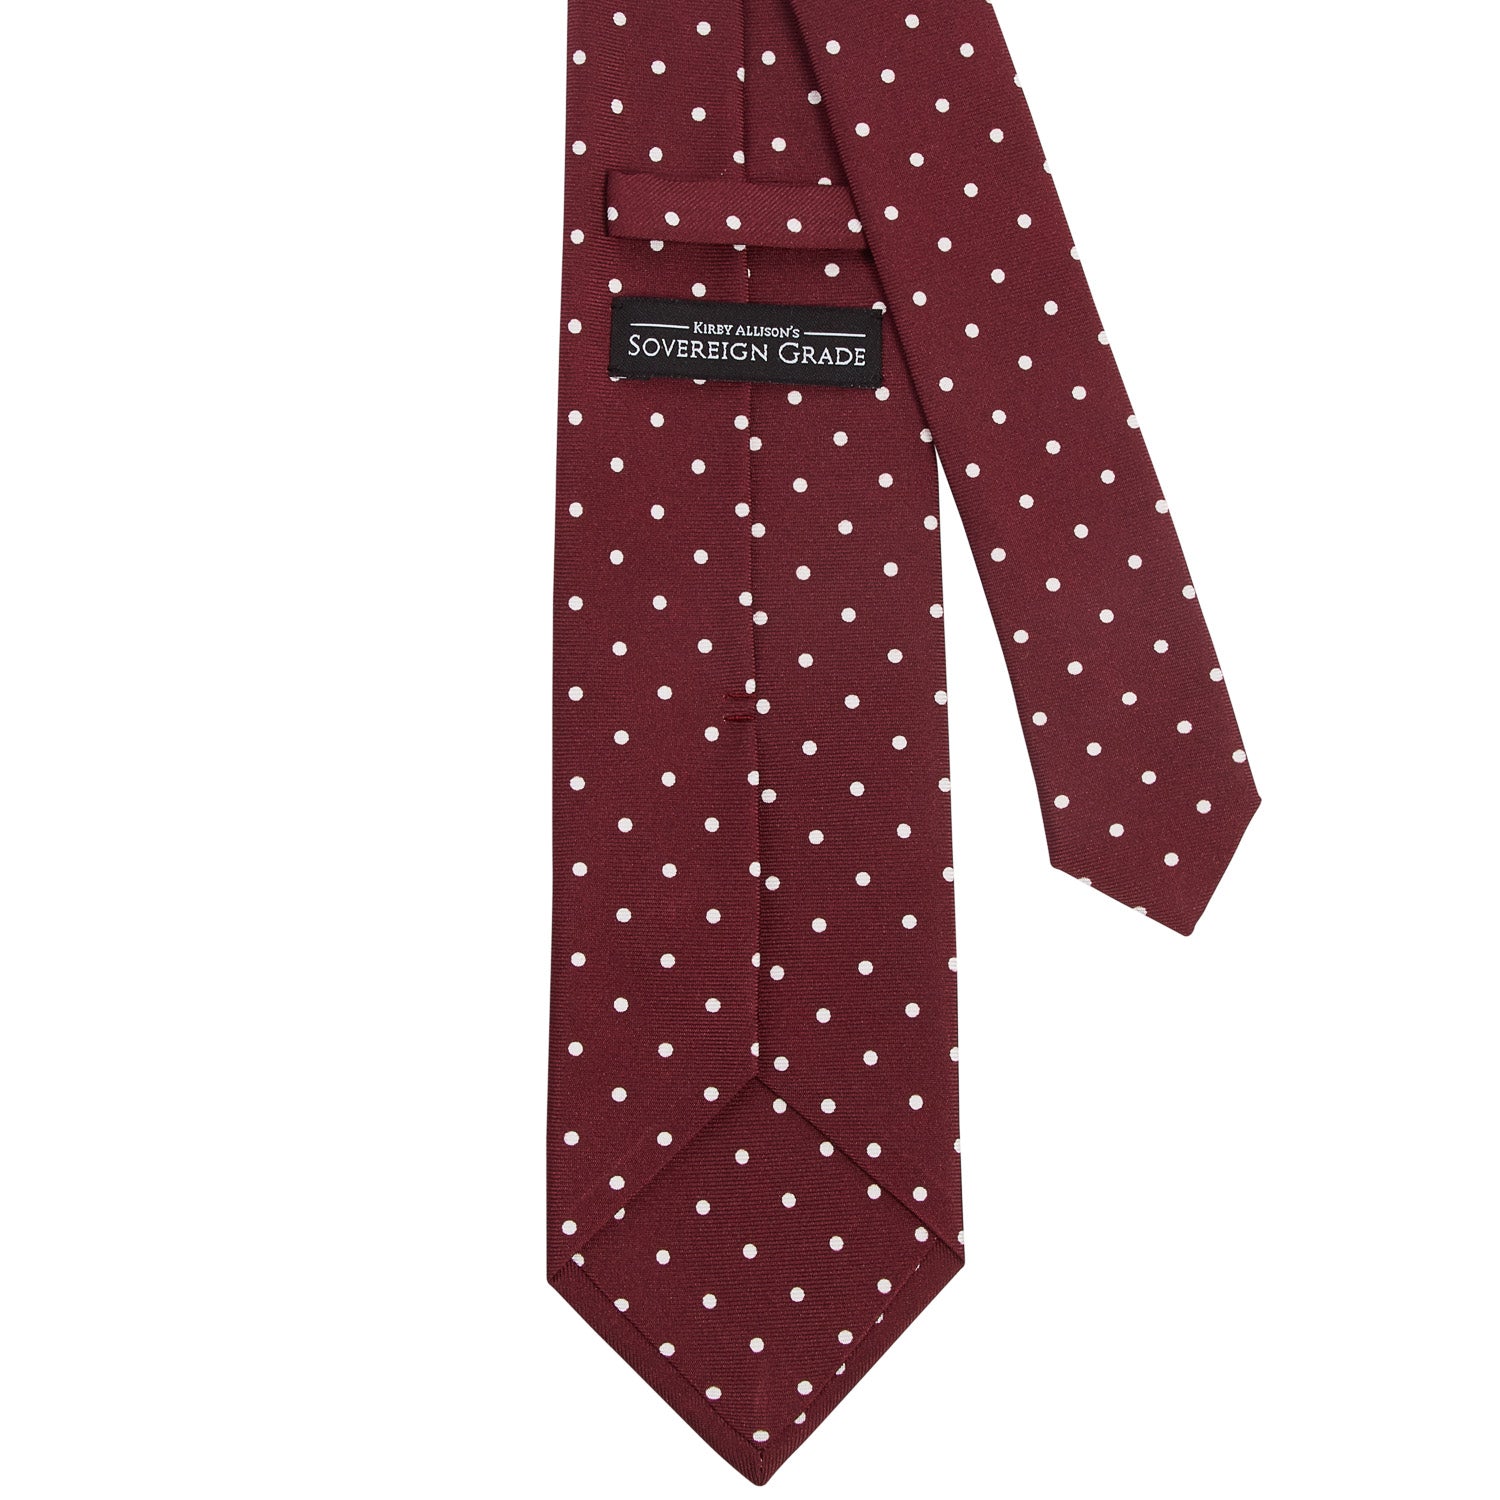 A high-quality Sovereign Grade Burgundy London Dot Printed Silk Tie from KirbyAllison.com on a white background.